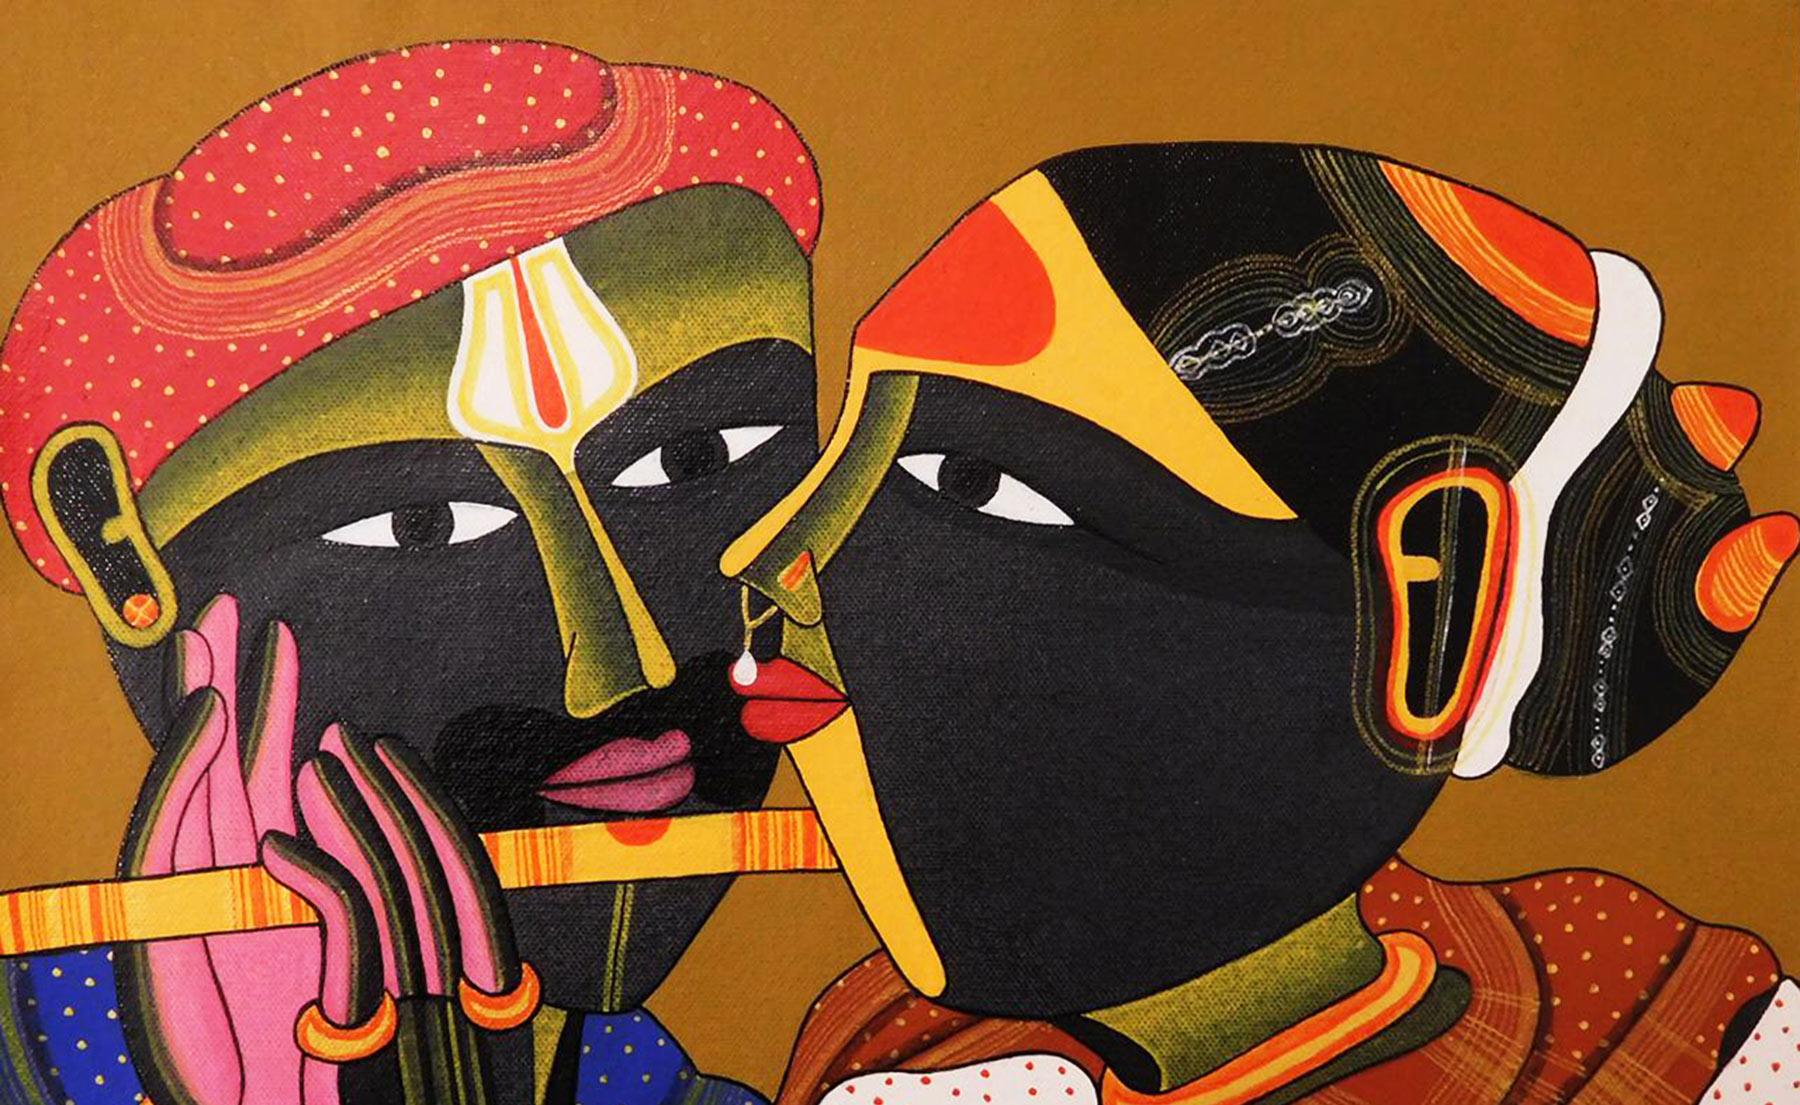 Telengana Couple, South Indian, Acrylic on Canvas, Red, Yellow, Brown 